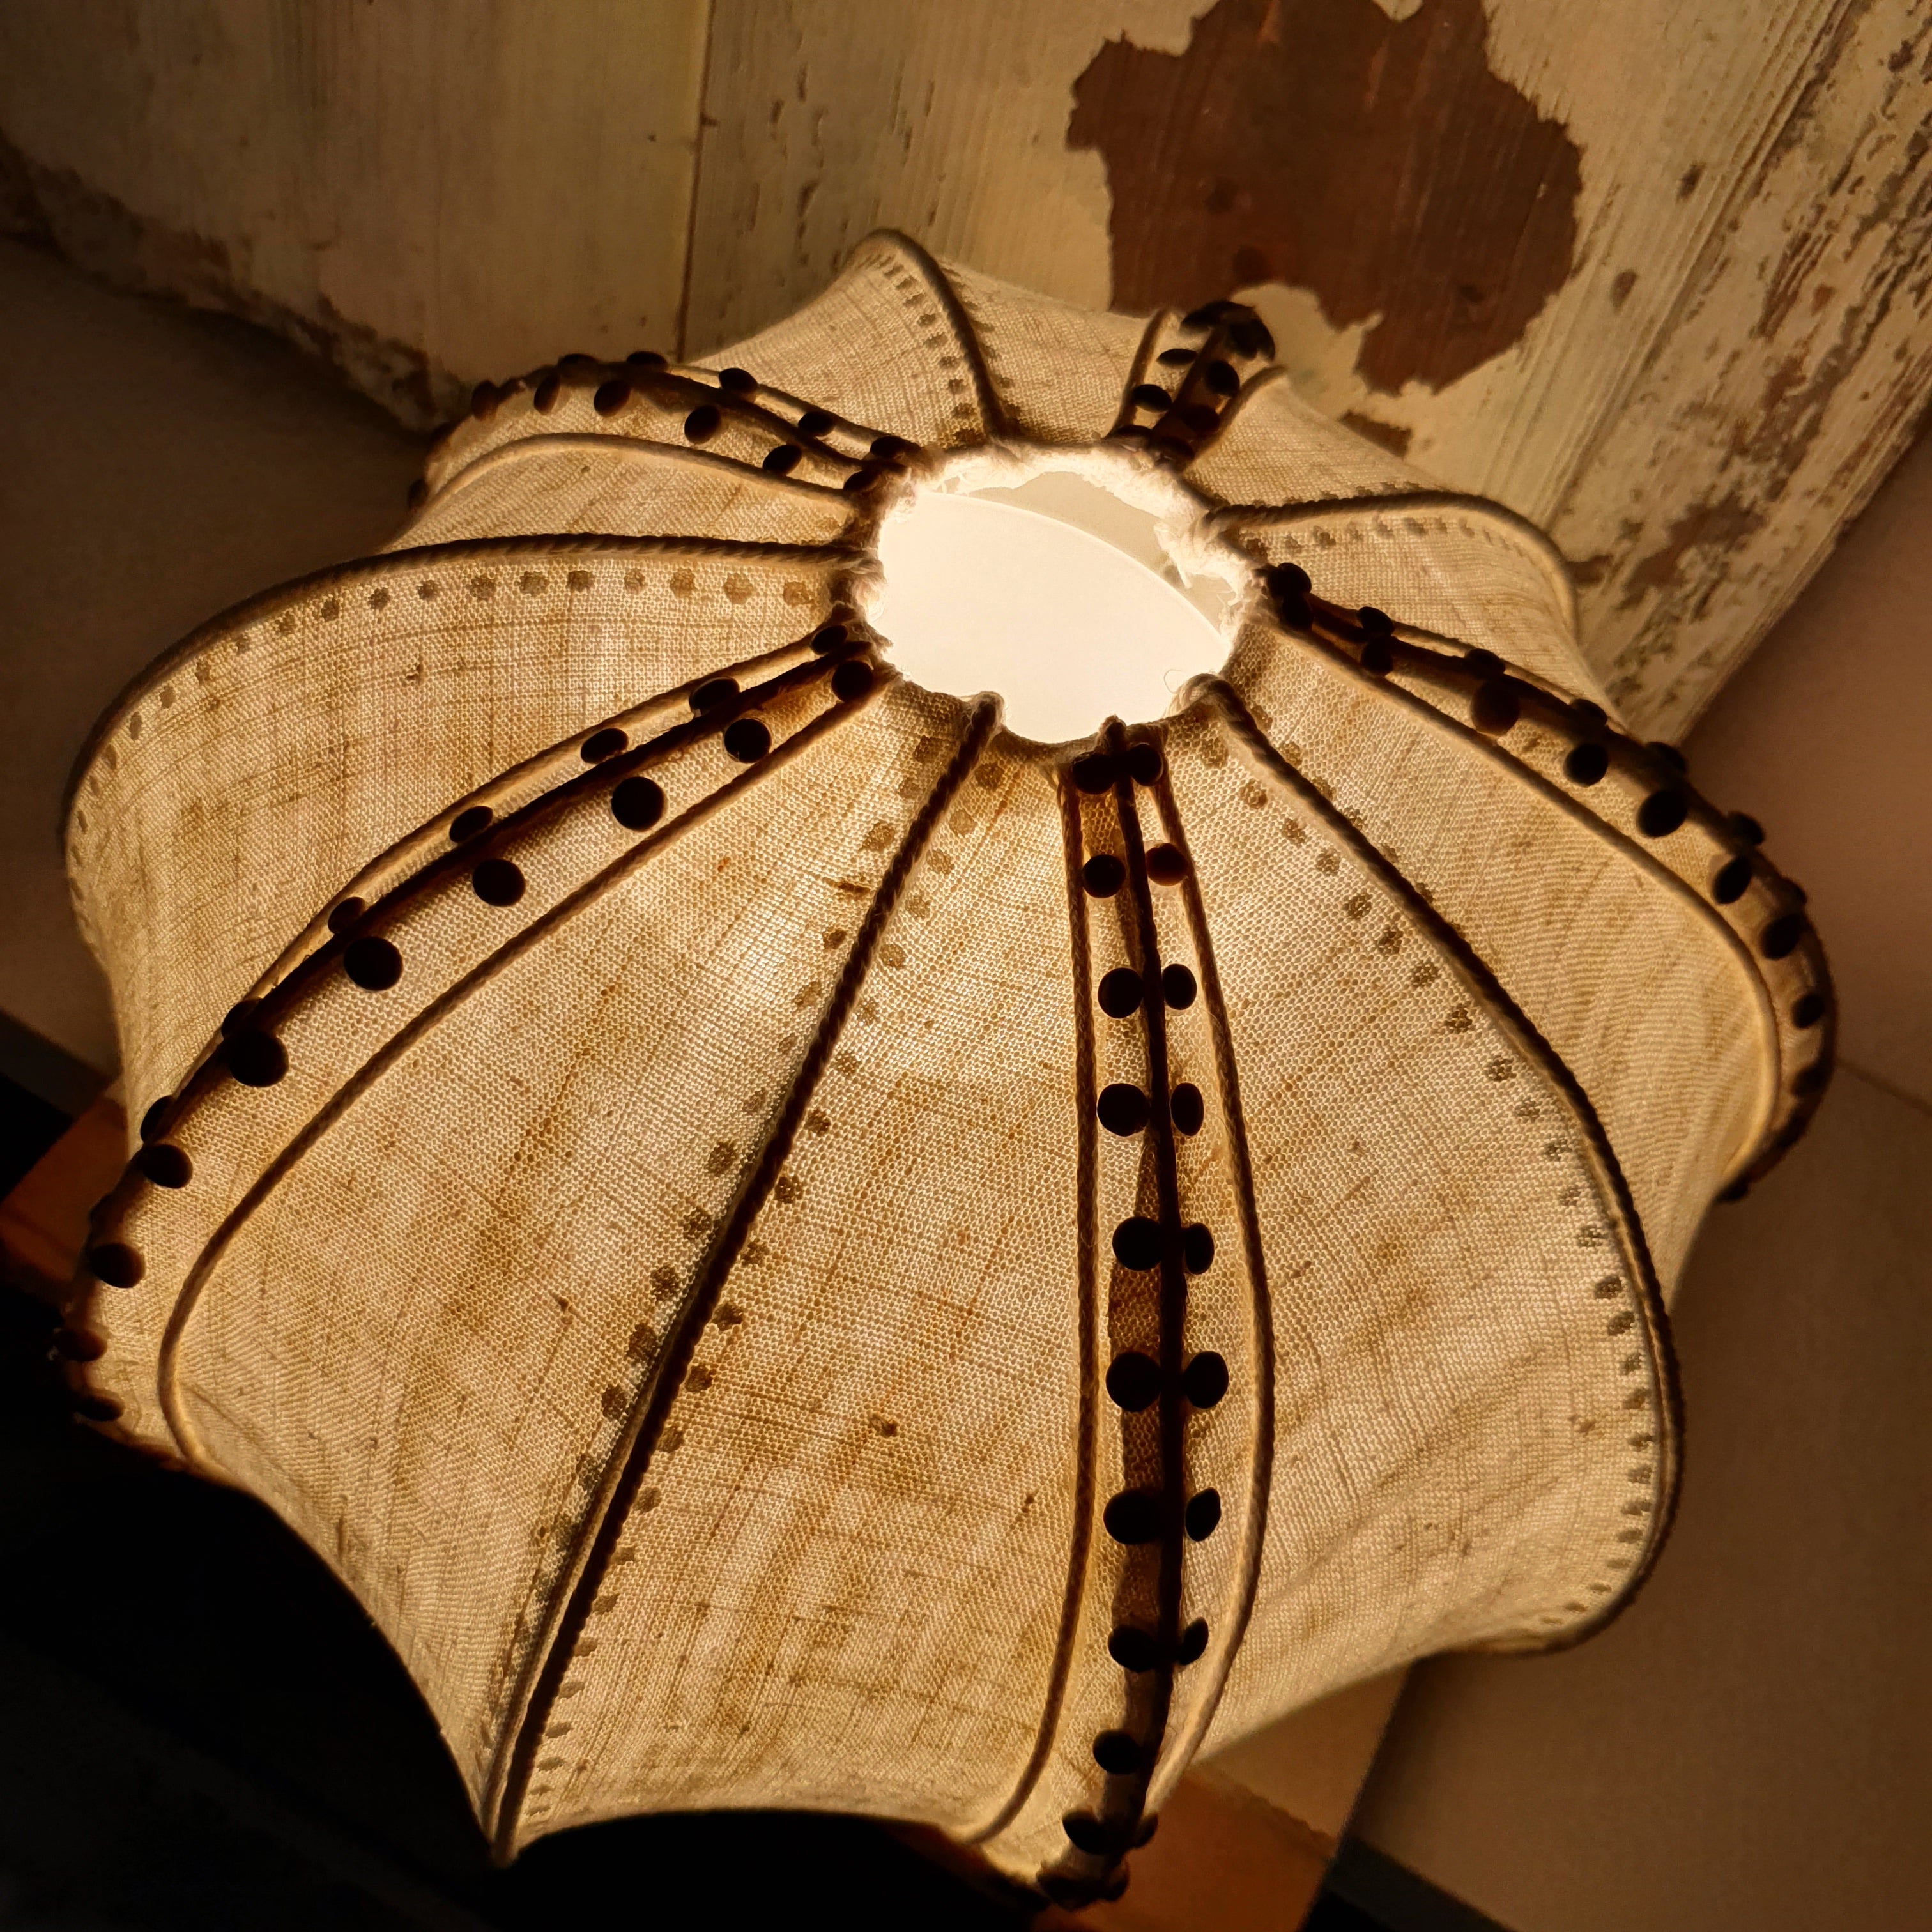 Sea Urchin Lamp with Wooden Base